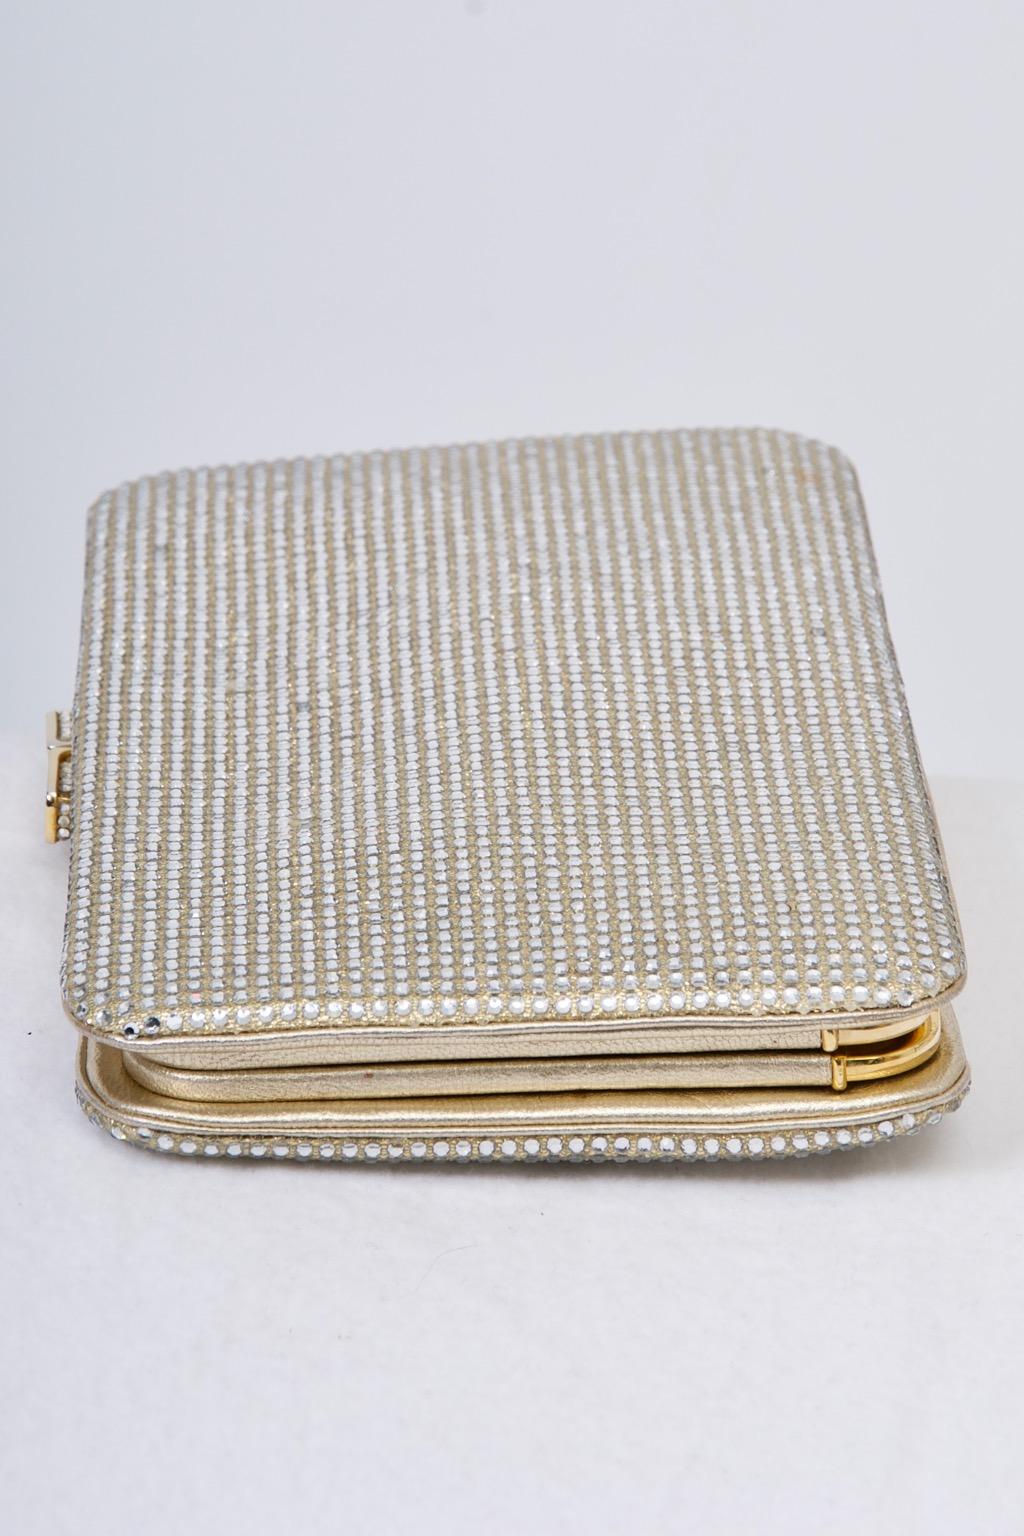 Judith Leiber Crystal Convertible Clutch In Good Condition For Sale In Alford, MA